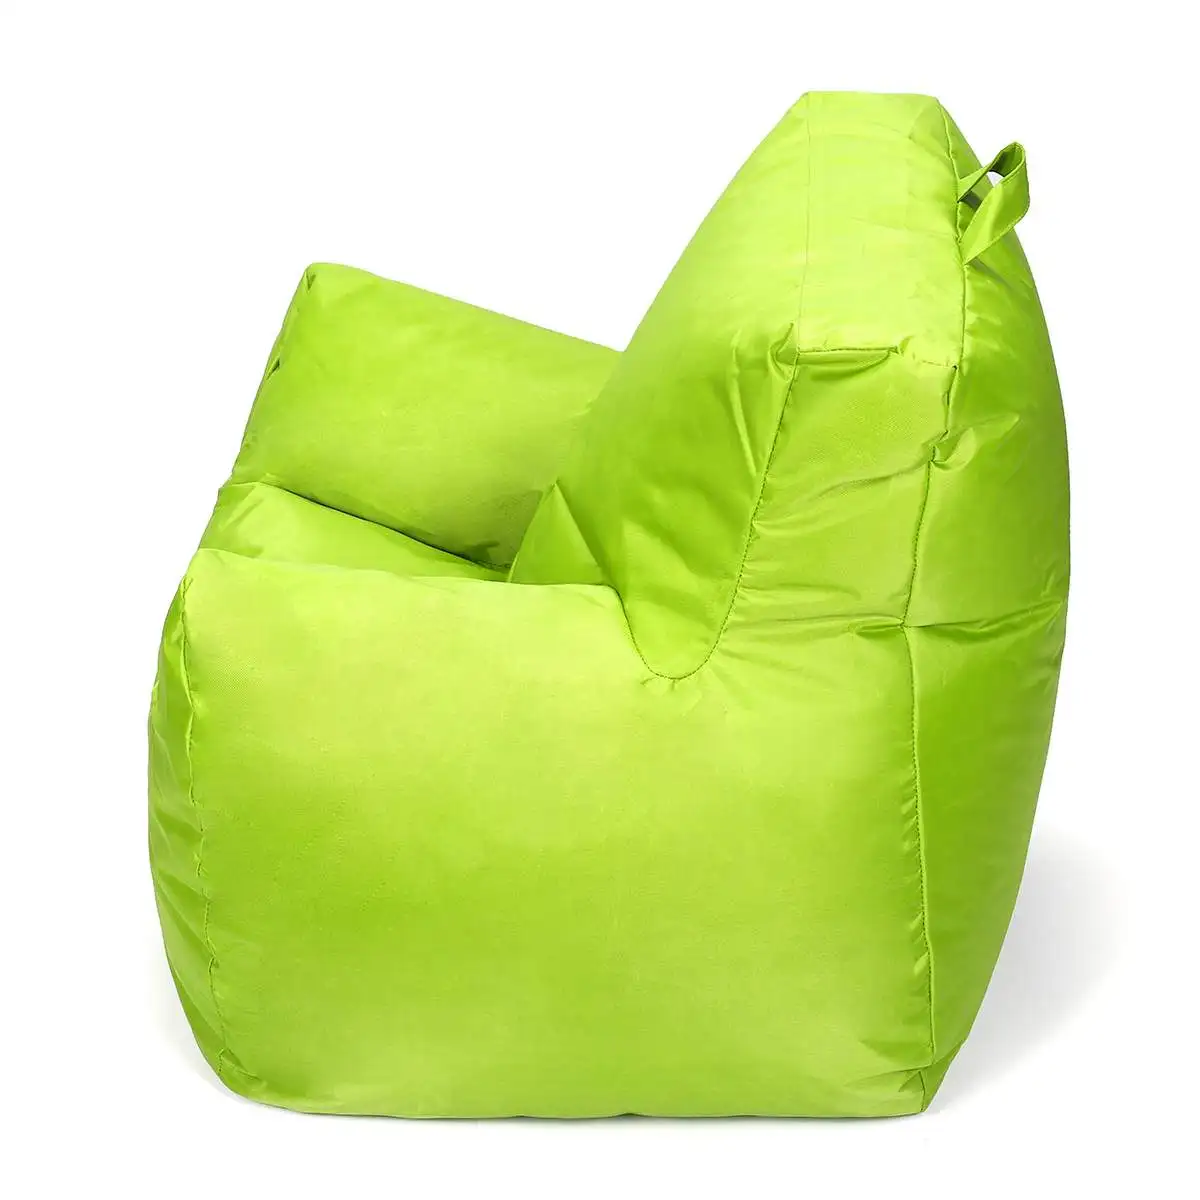 Lazy Sofas Cover Chairs 420D Oxford Cloth Bean Bag Sofas Lounger Seat Bean Bag Pouf Puff Couch Tatami Living Room for Children